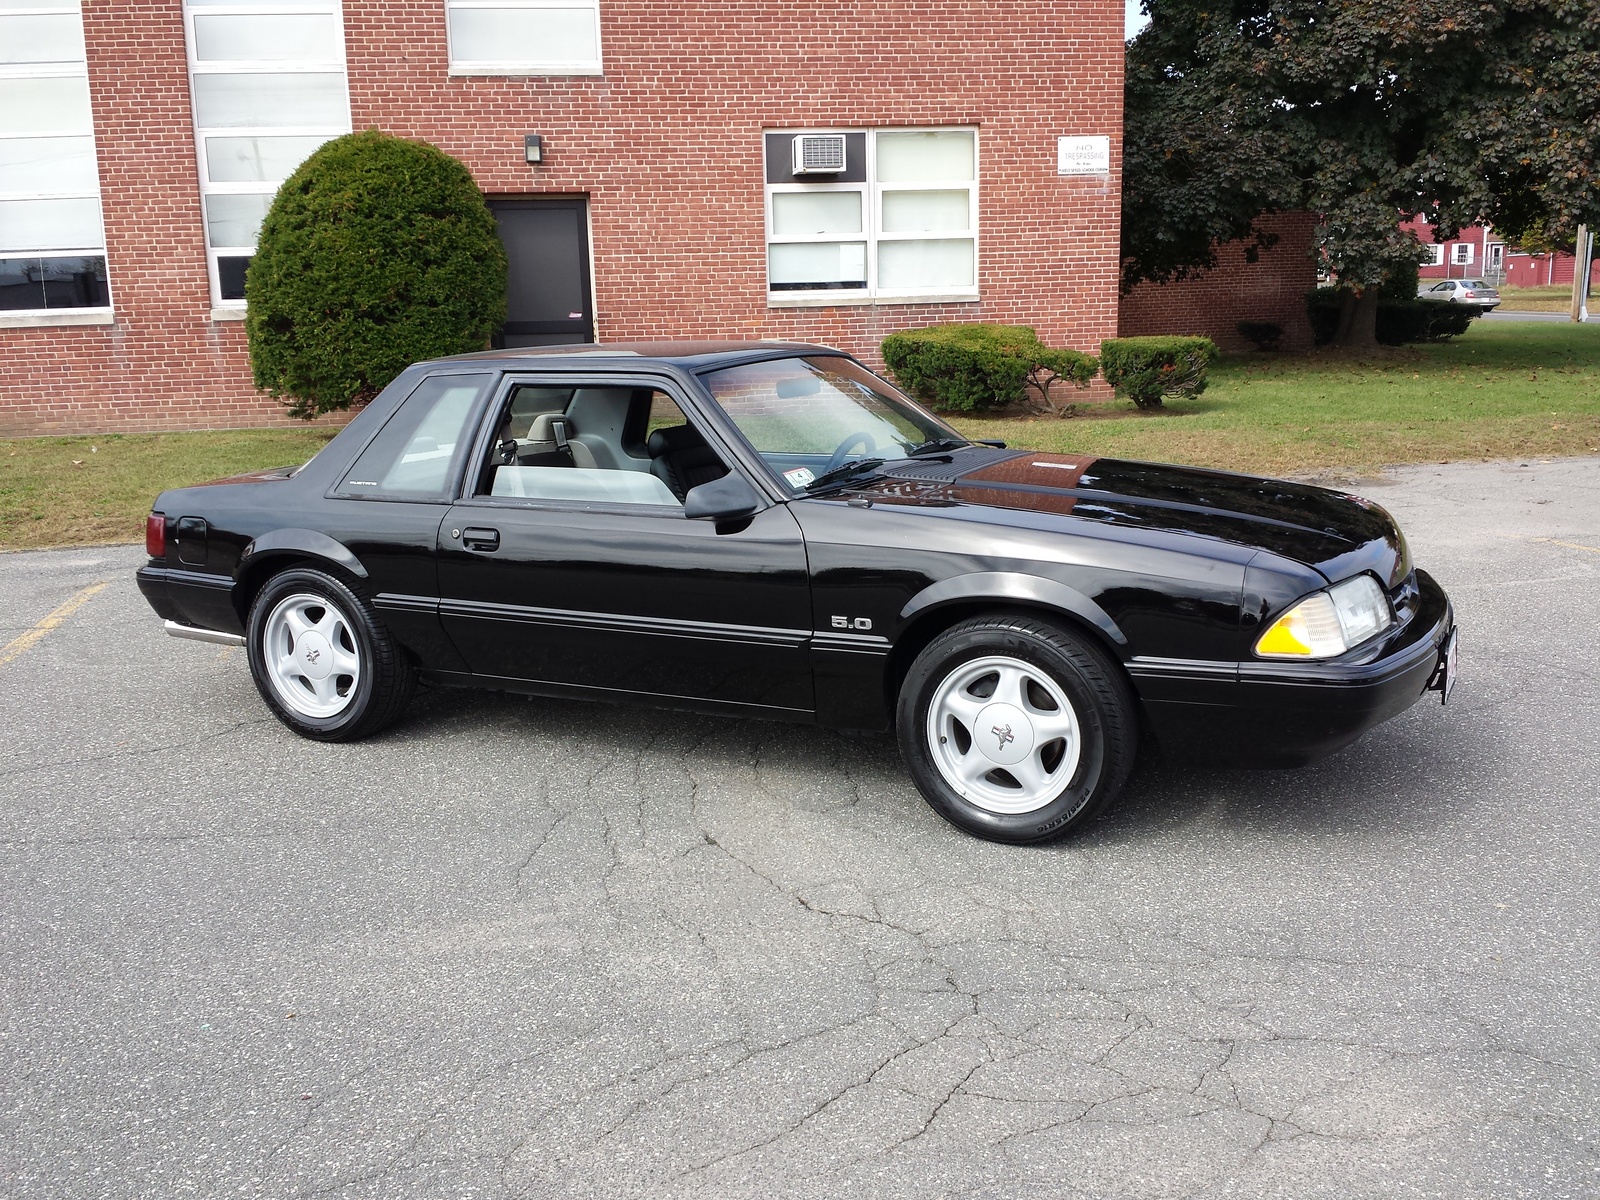 1991 Ford mustang lx 5.0 specs #7